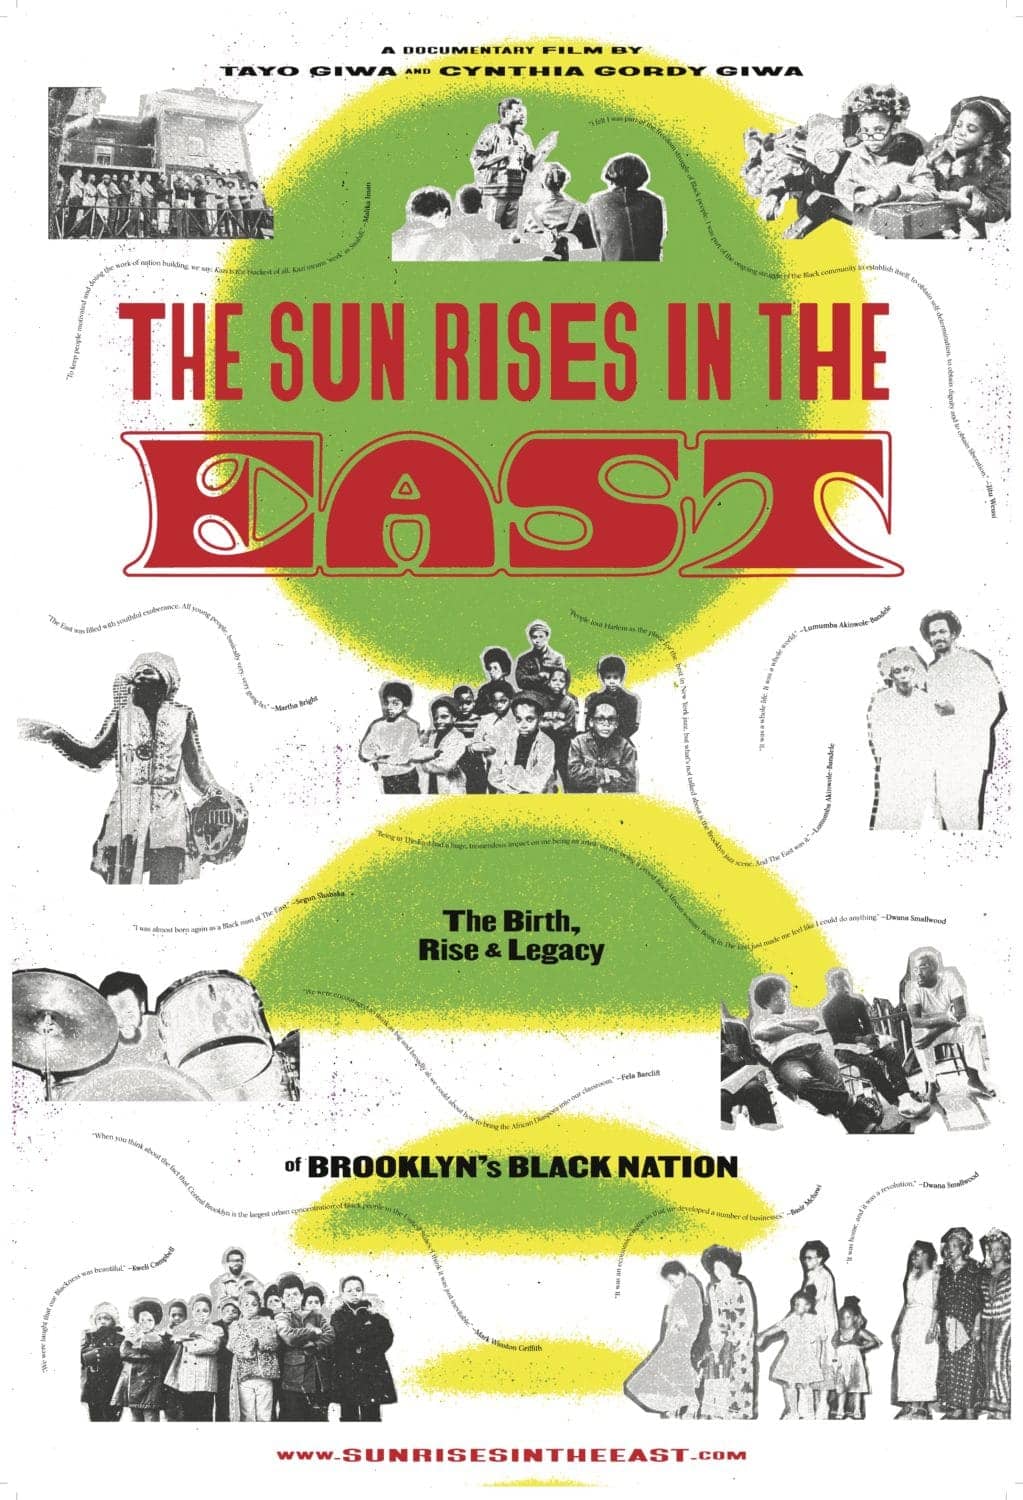 The-Sun-Rises-in-The-East-film-poster-1, Central Brooklyn to East Oakland: ‘The Sun Rises in the East’ at Oakland Int’l Film Festival 9/18, Culture Currents Local News & Views 